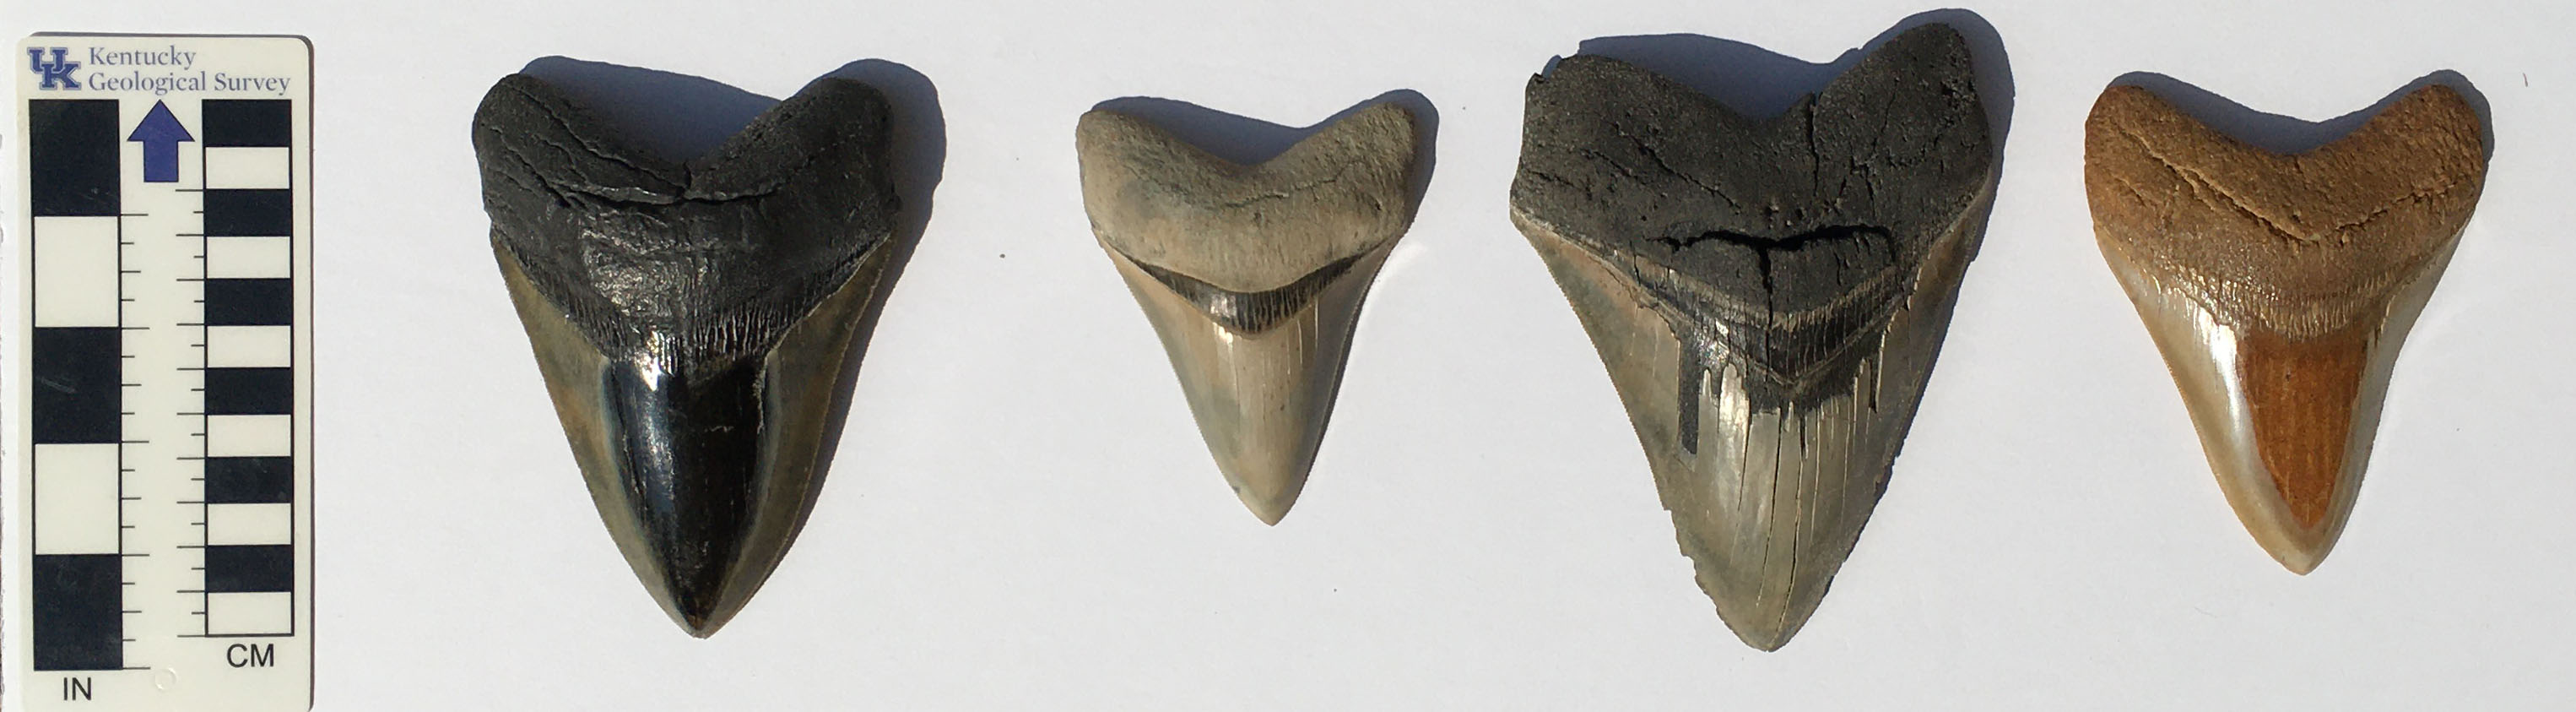 Megalodon teeth have different colors. Colors in fossil teeth are a function of the minerals in waters and surrounding sediments during fossilization. From left to right these specimens are from Florida, North Carolina. An uncertain location in the southeastern United States, and the Pacific Ocean east of Australia.